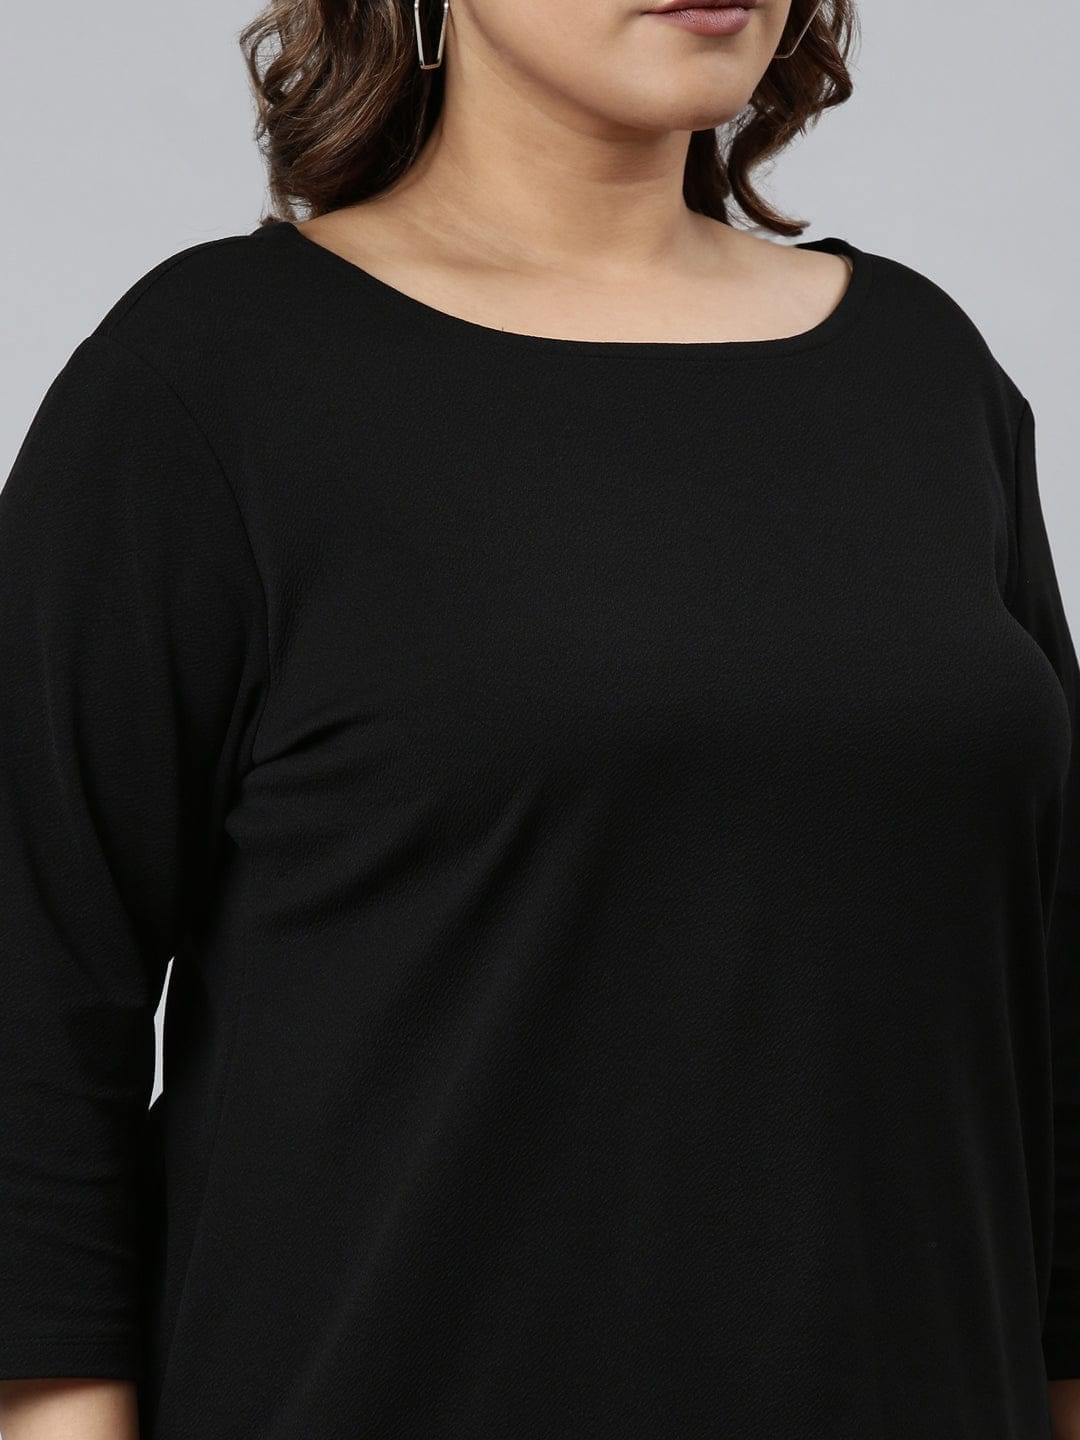 buy Black t-shirt of TheShaili comes with timeless black hue